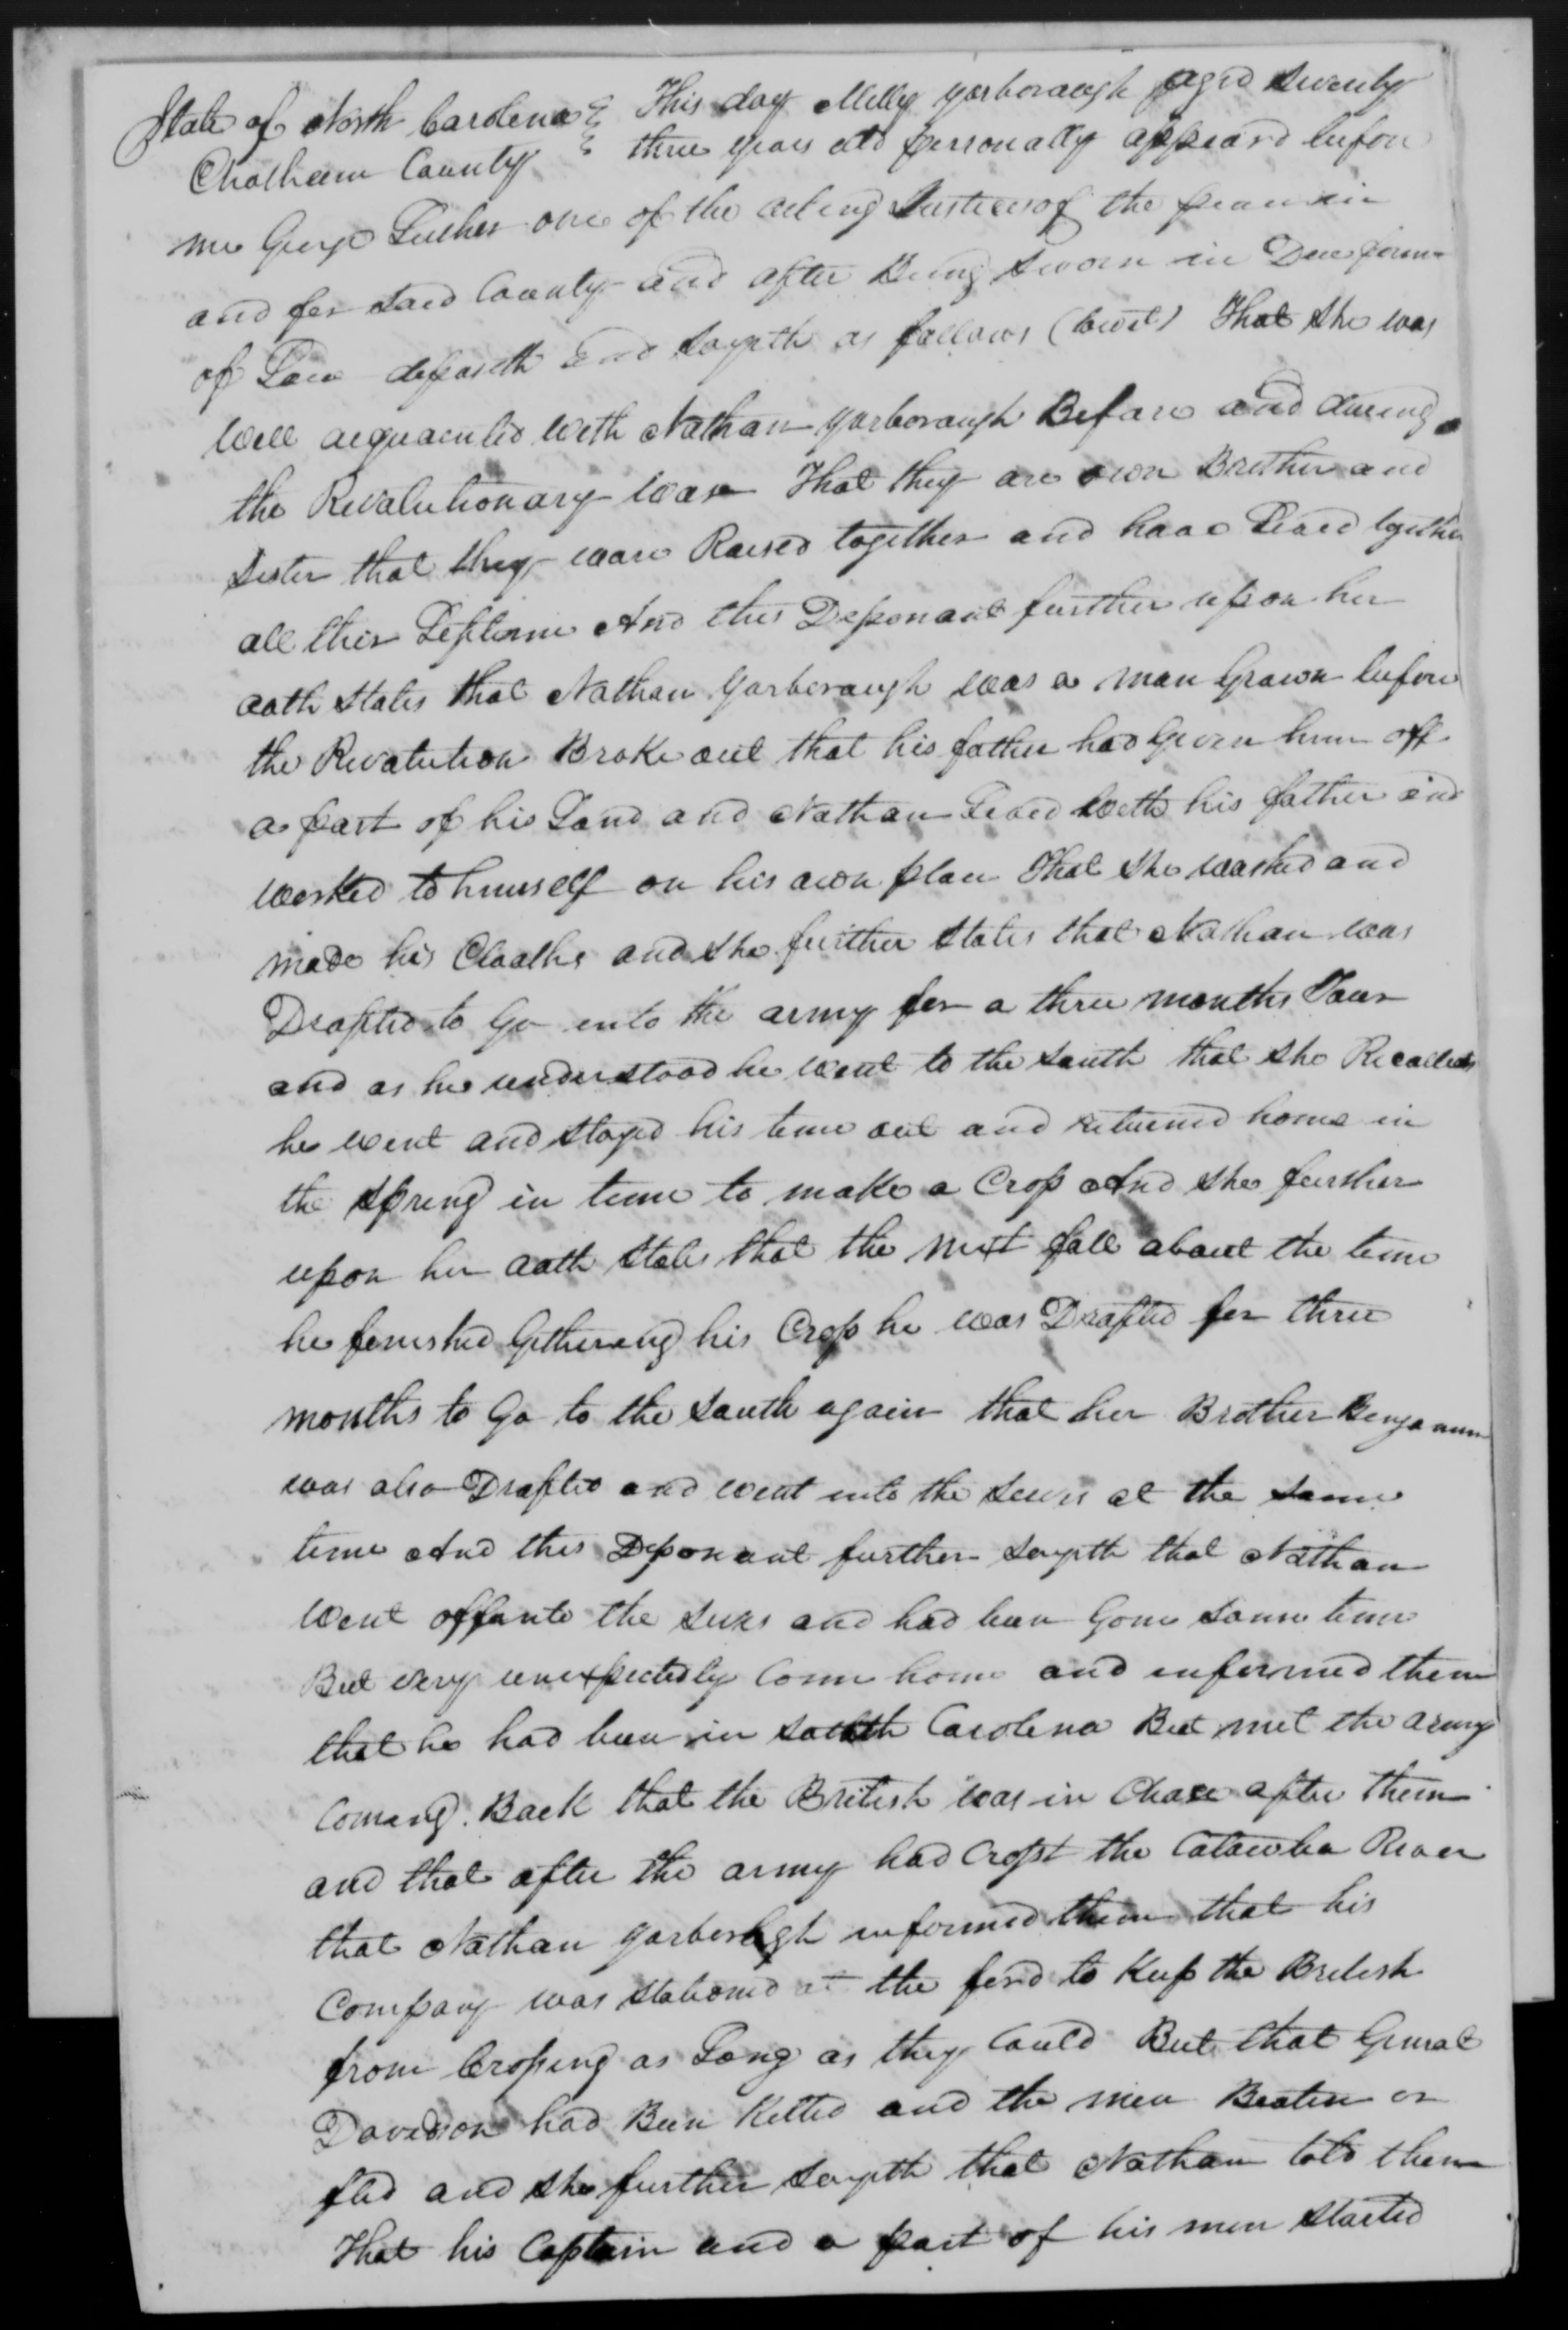 Affidavit of Milly Yarborough in support of a Pension Claim for Nathan Yarborough, 5 August 1833, page 1